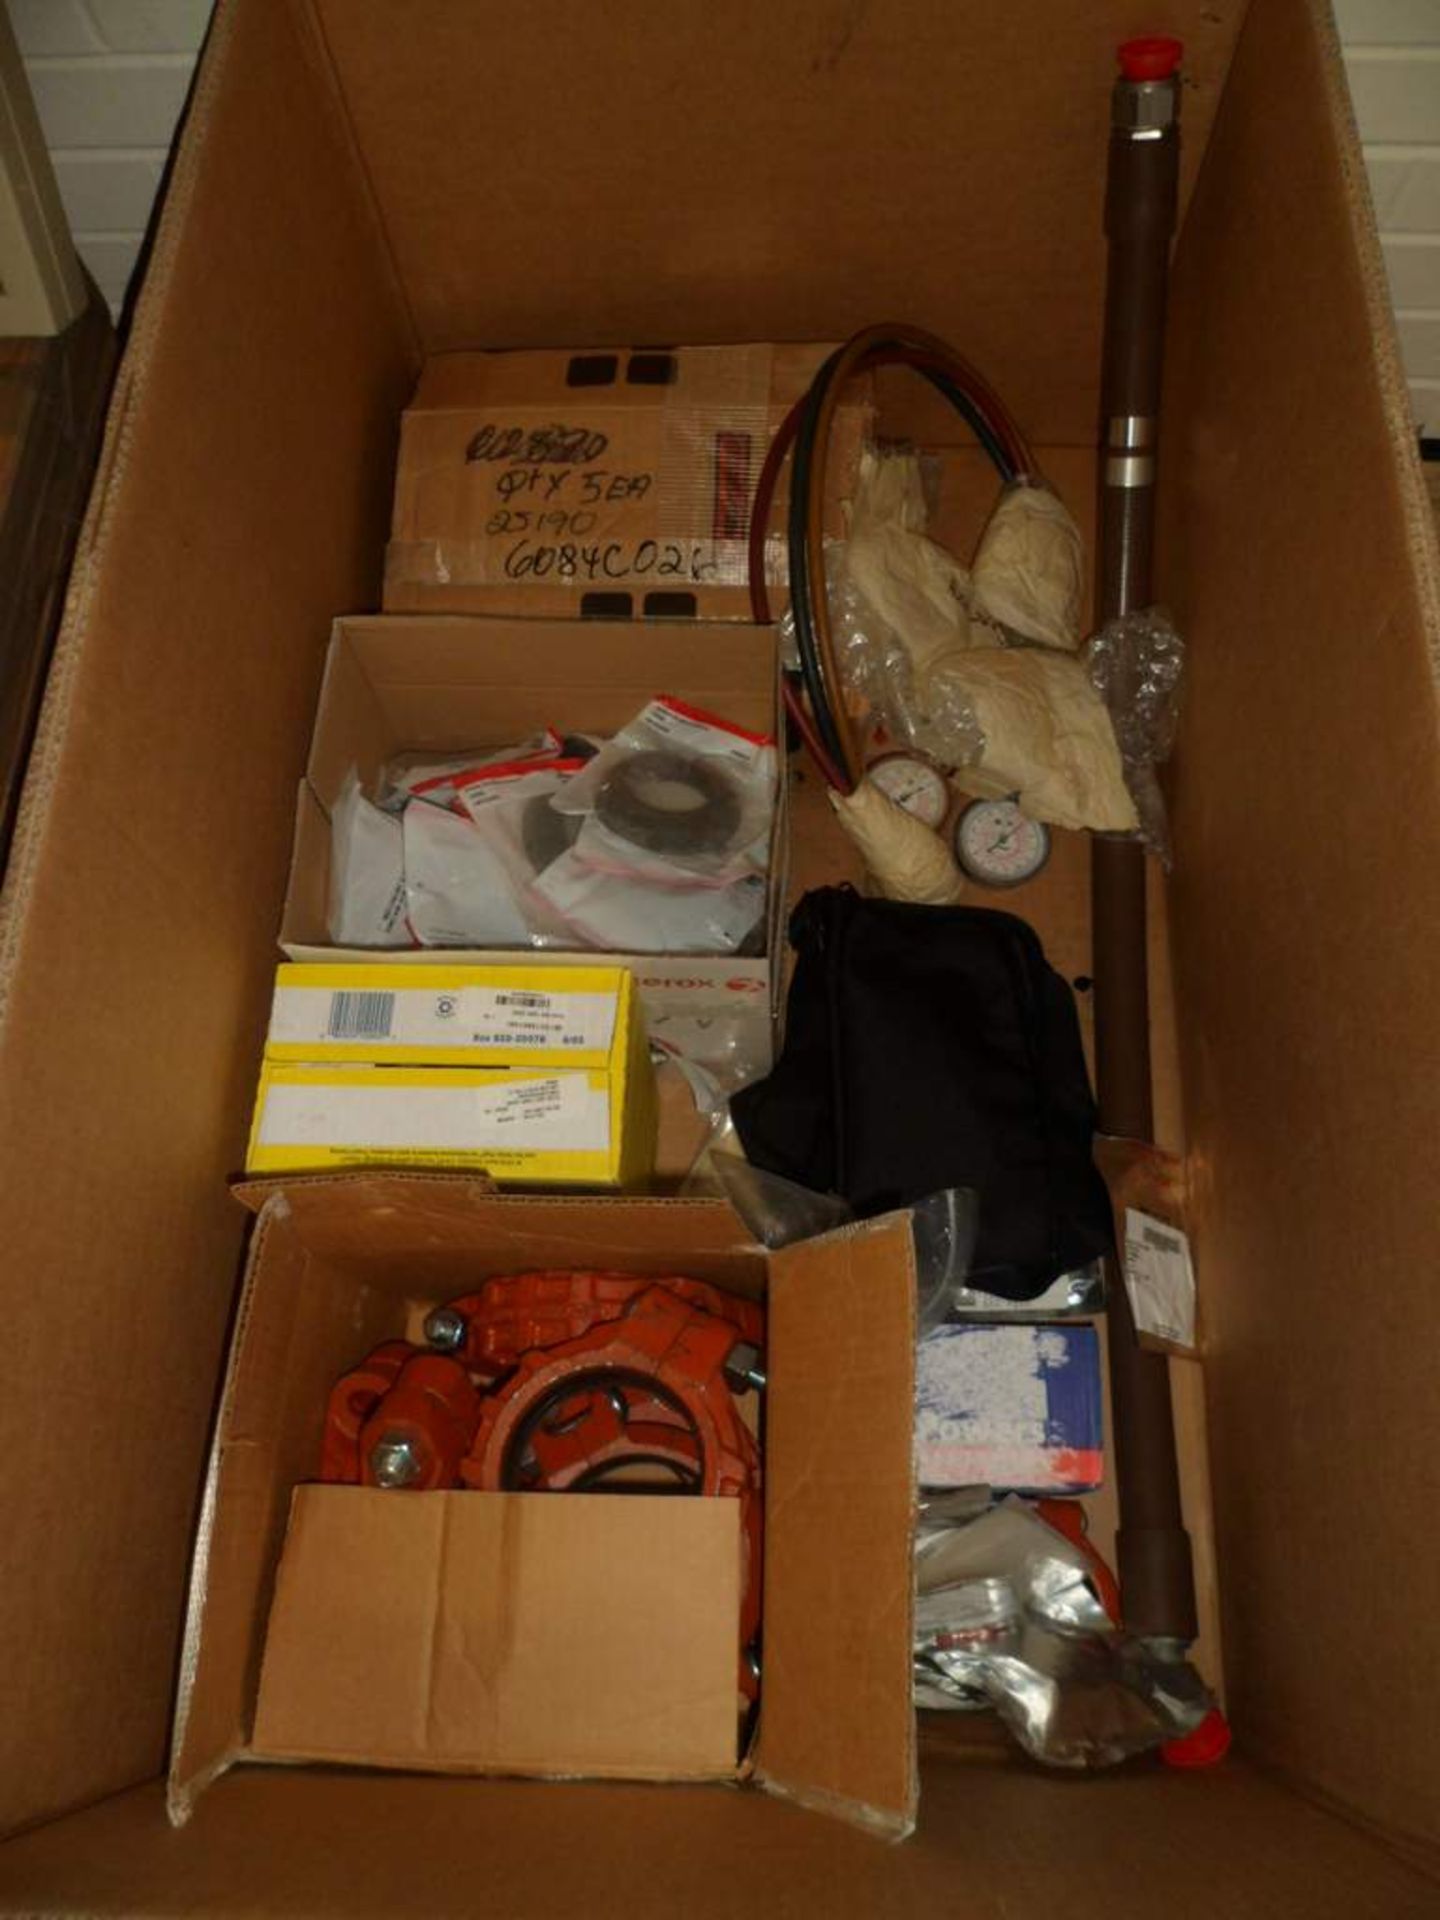 Assorted components - Wheel gauges, screws, spring, hose clamps, ear plugs - Image 3 of 6